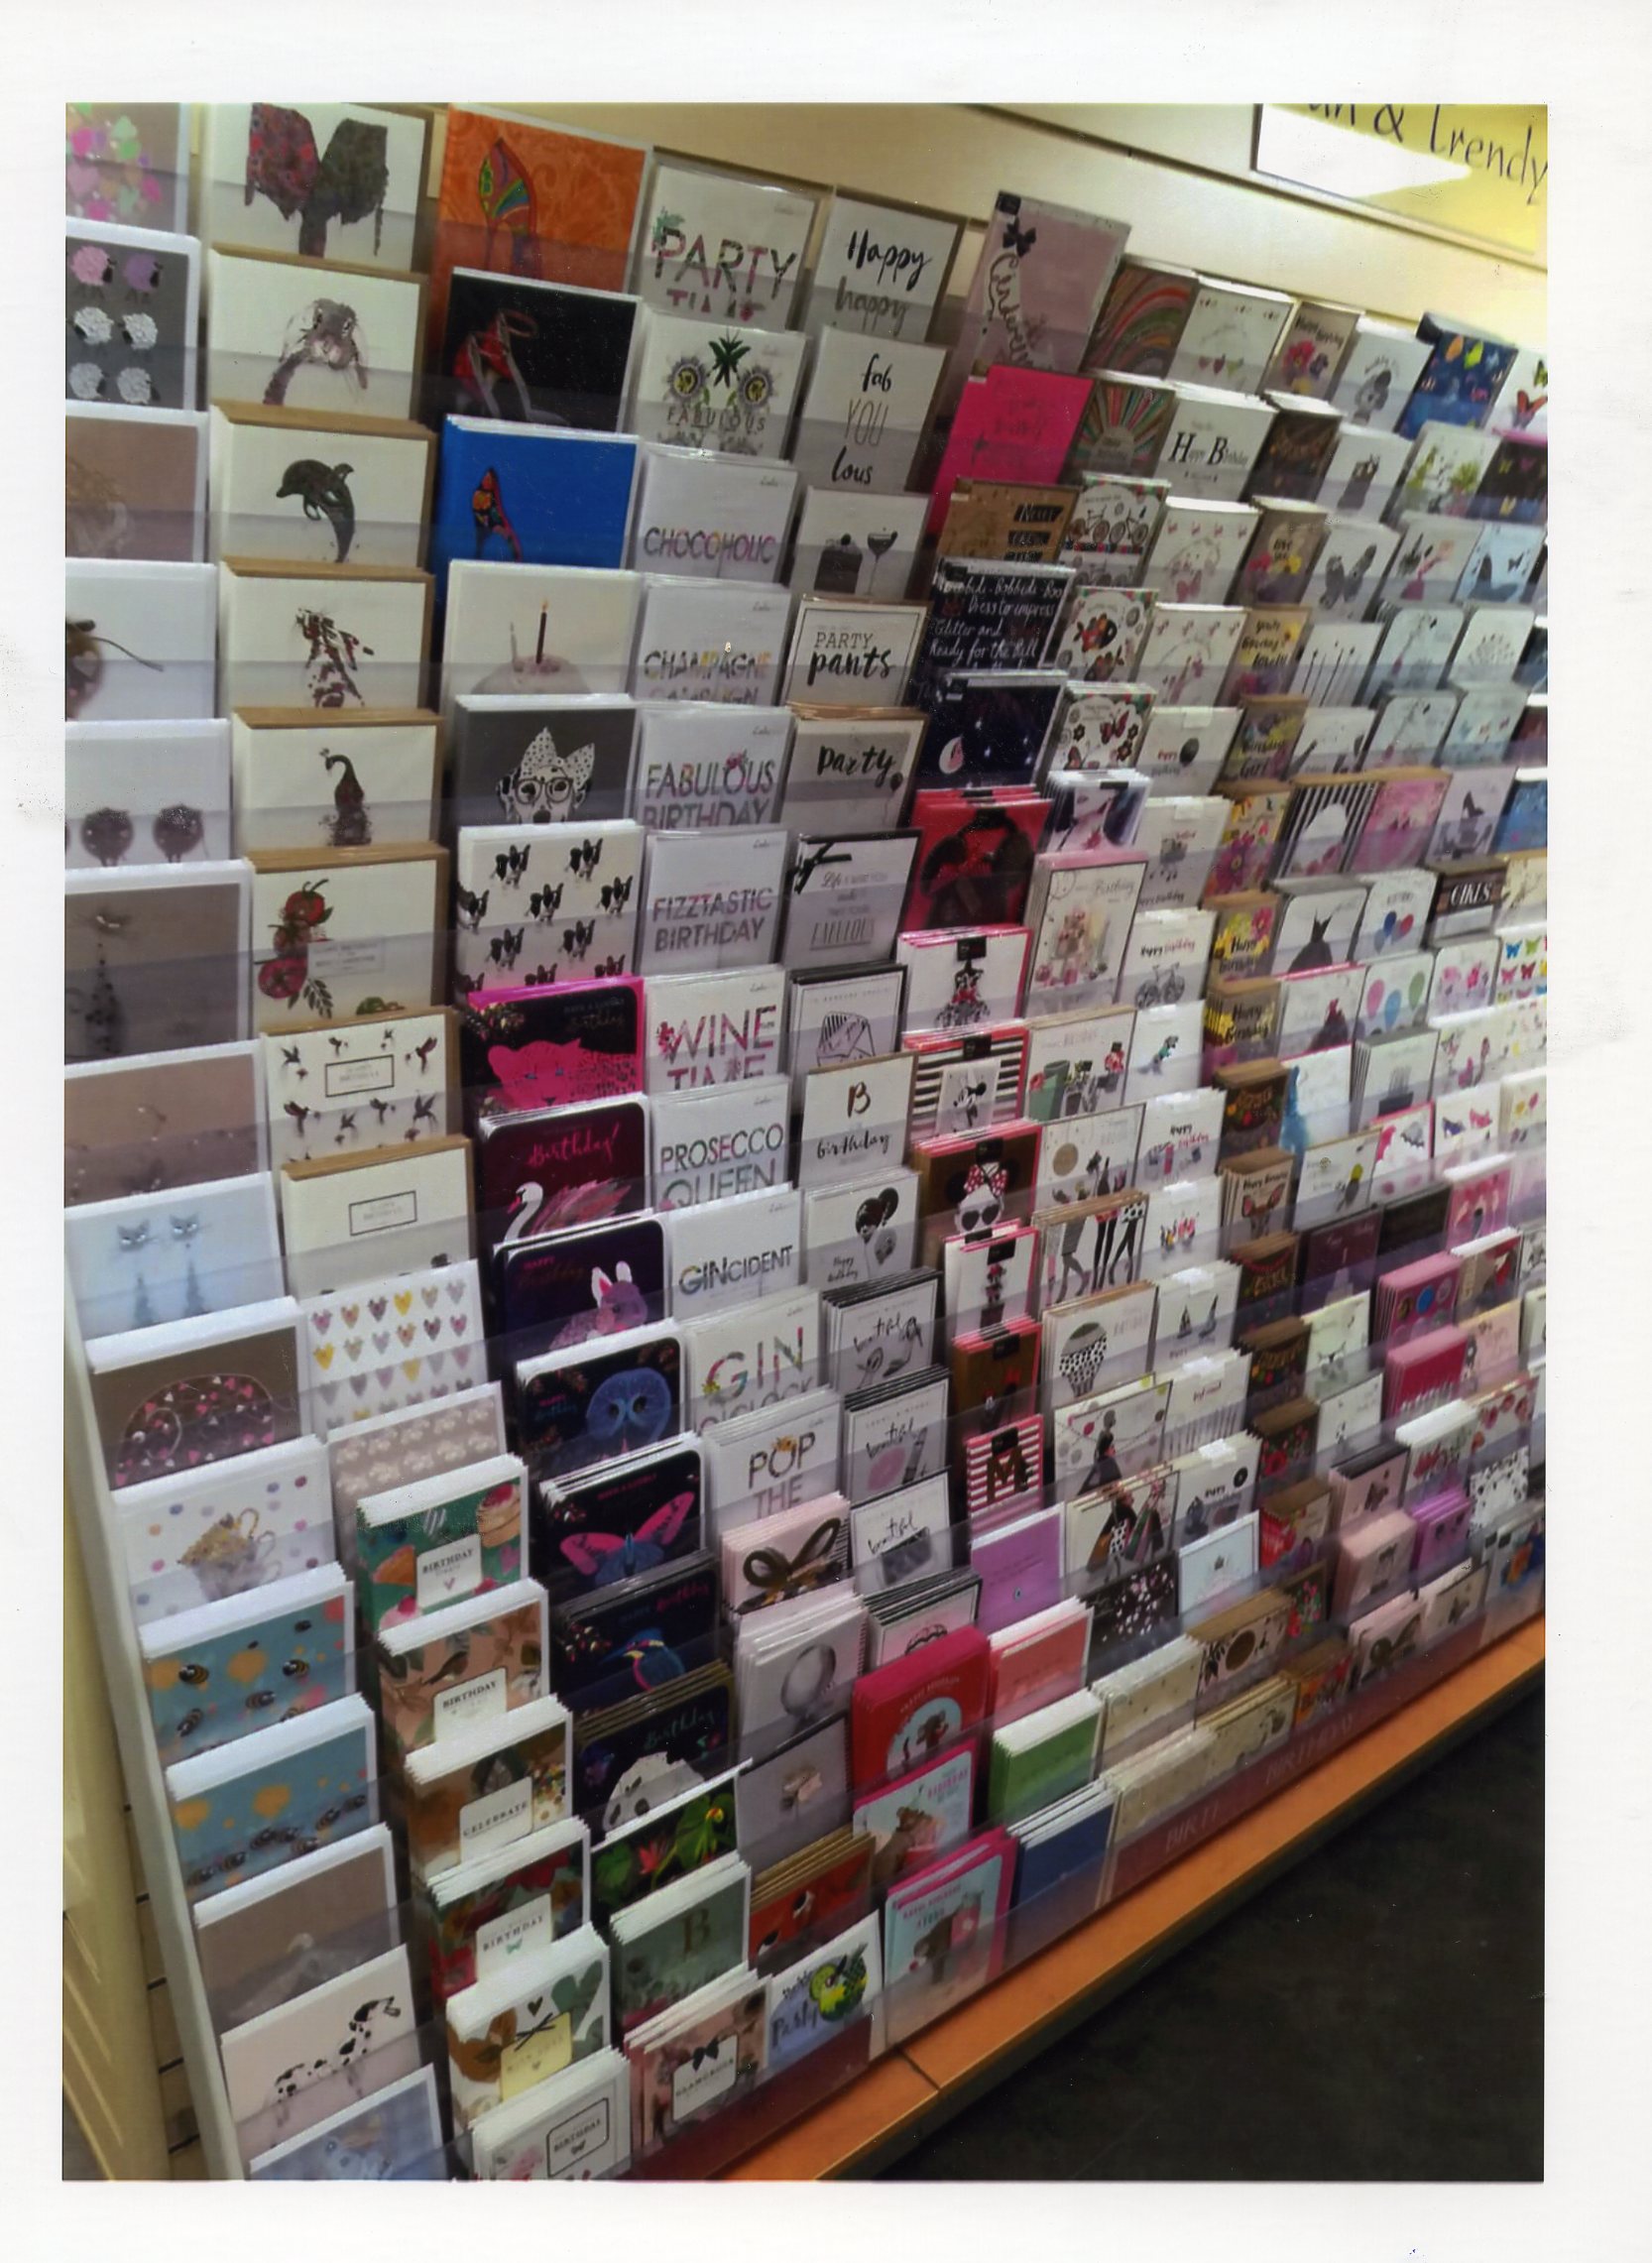 Above: One of the card racks in the Well Good Card Shop.